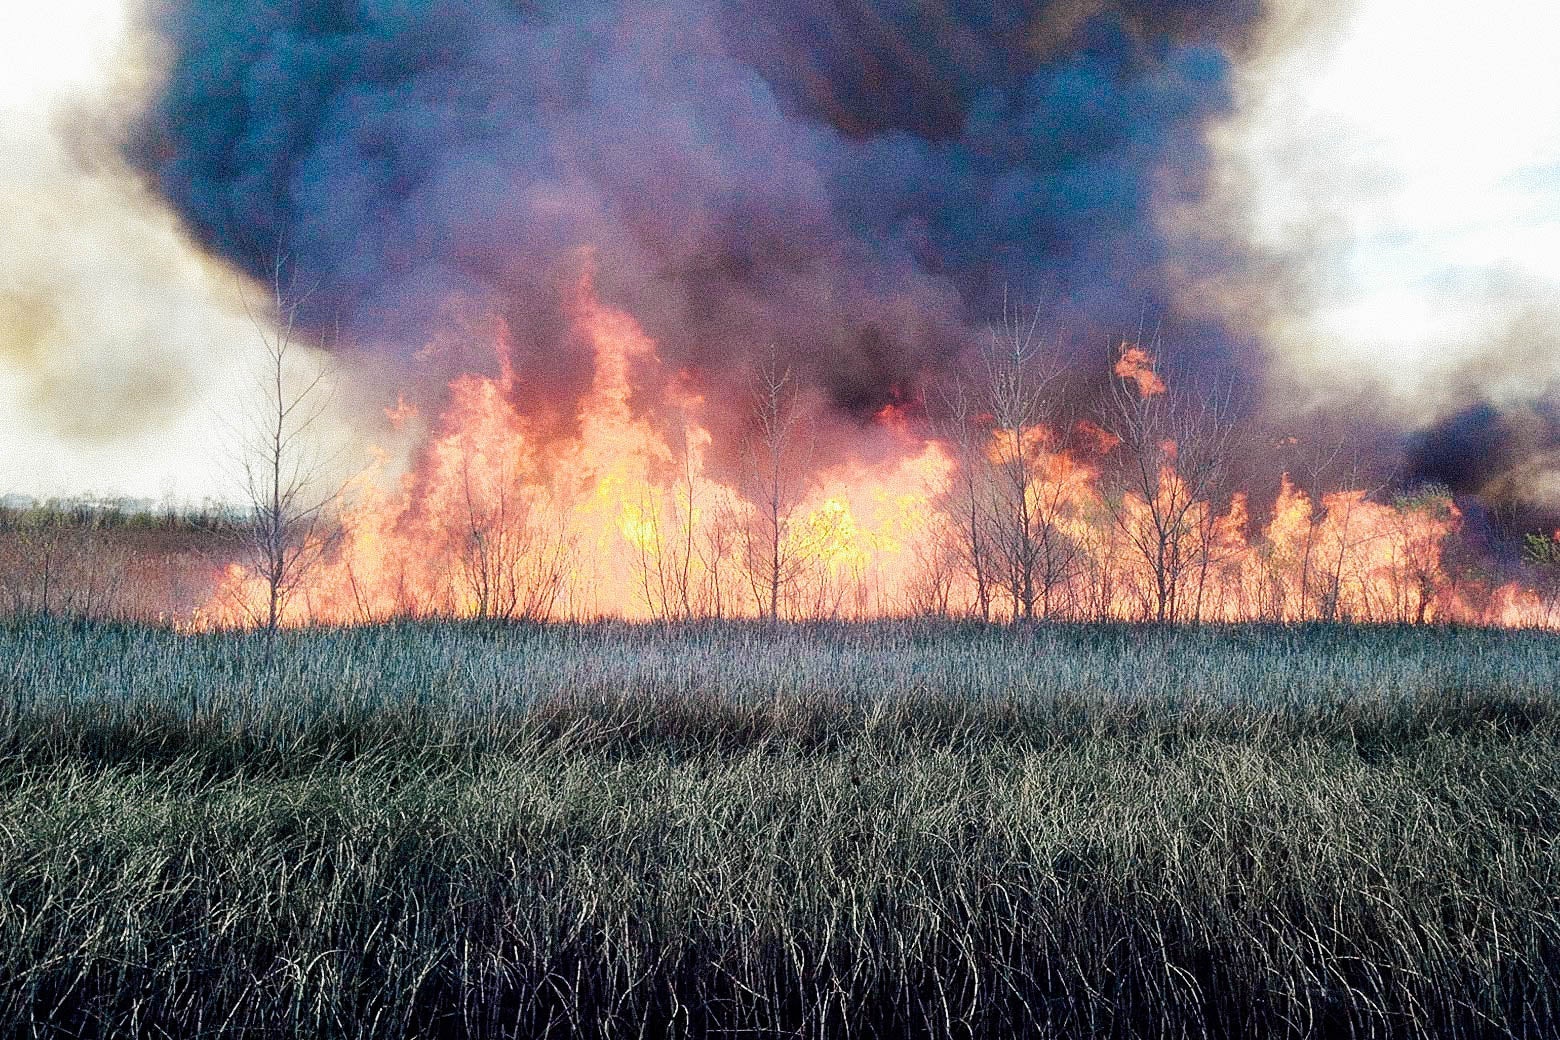 In a grassland, a few of trees on fire and bellowing smoke into the sky can be seen